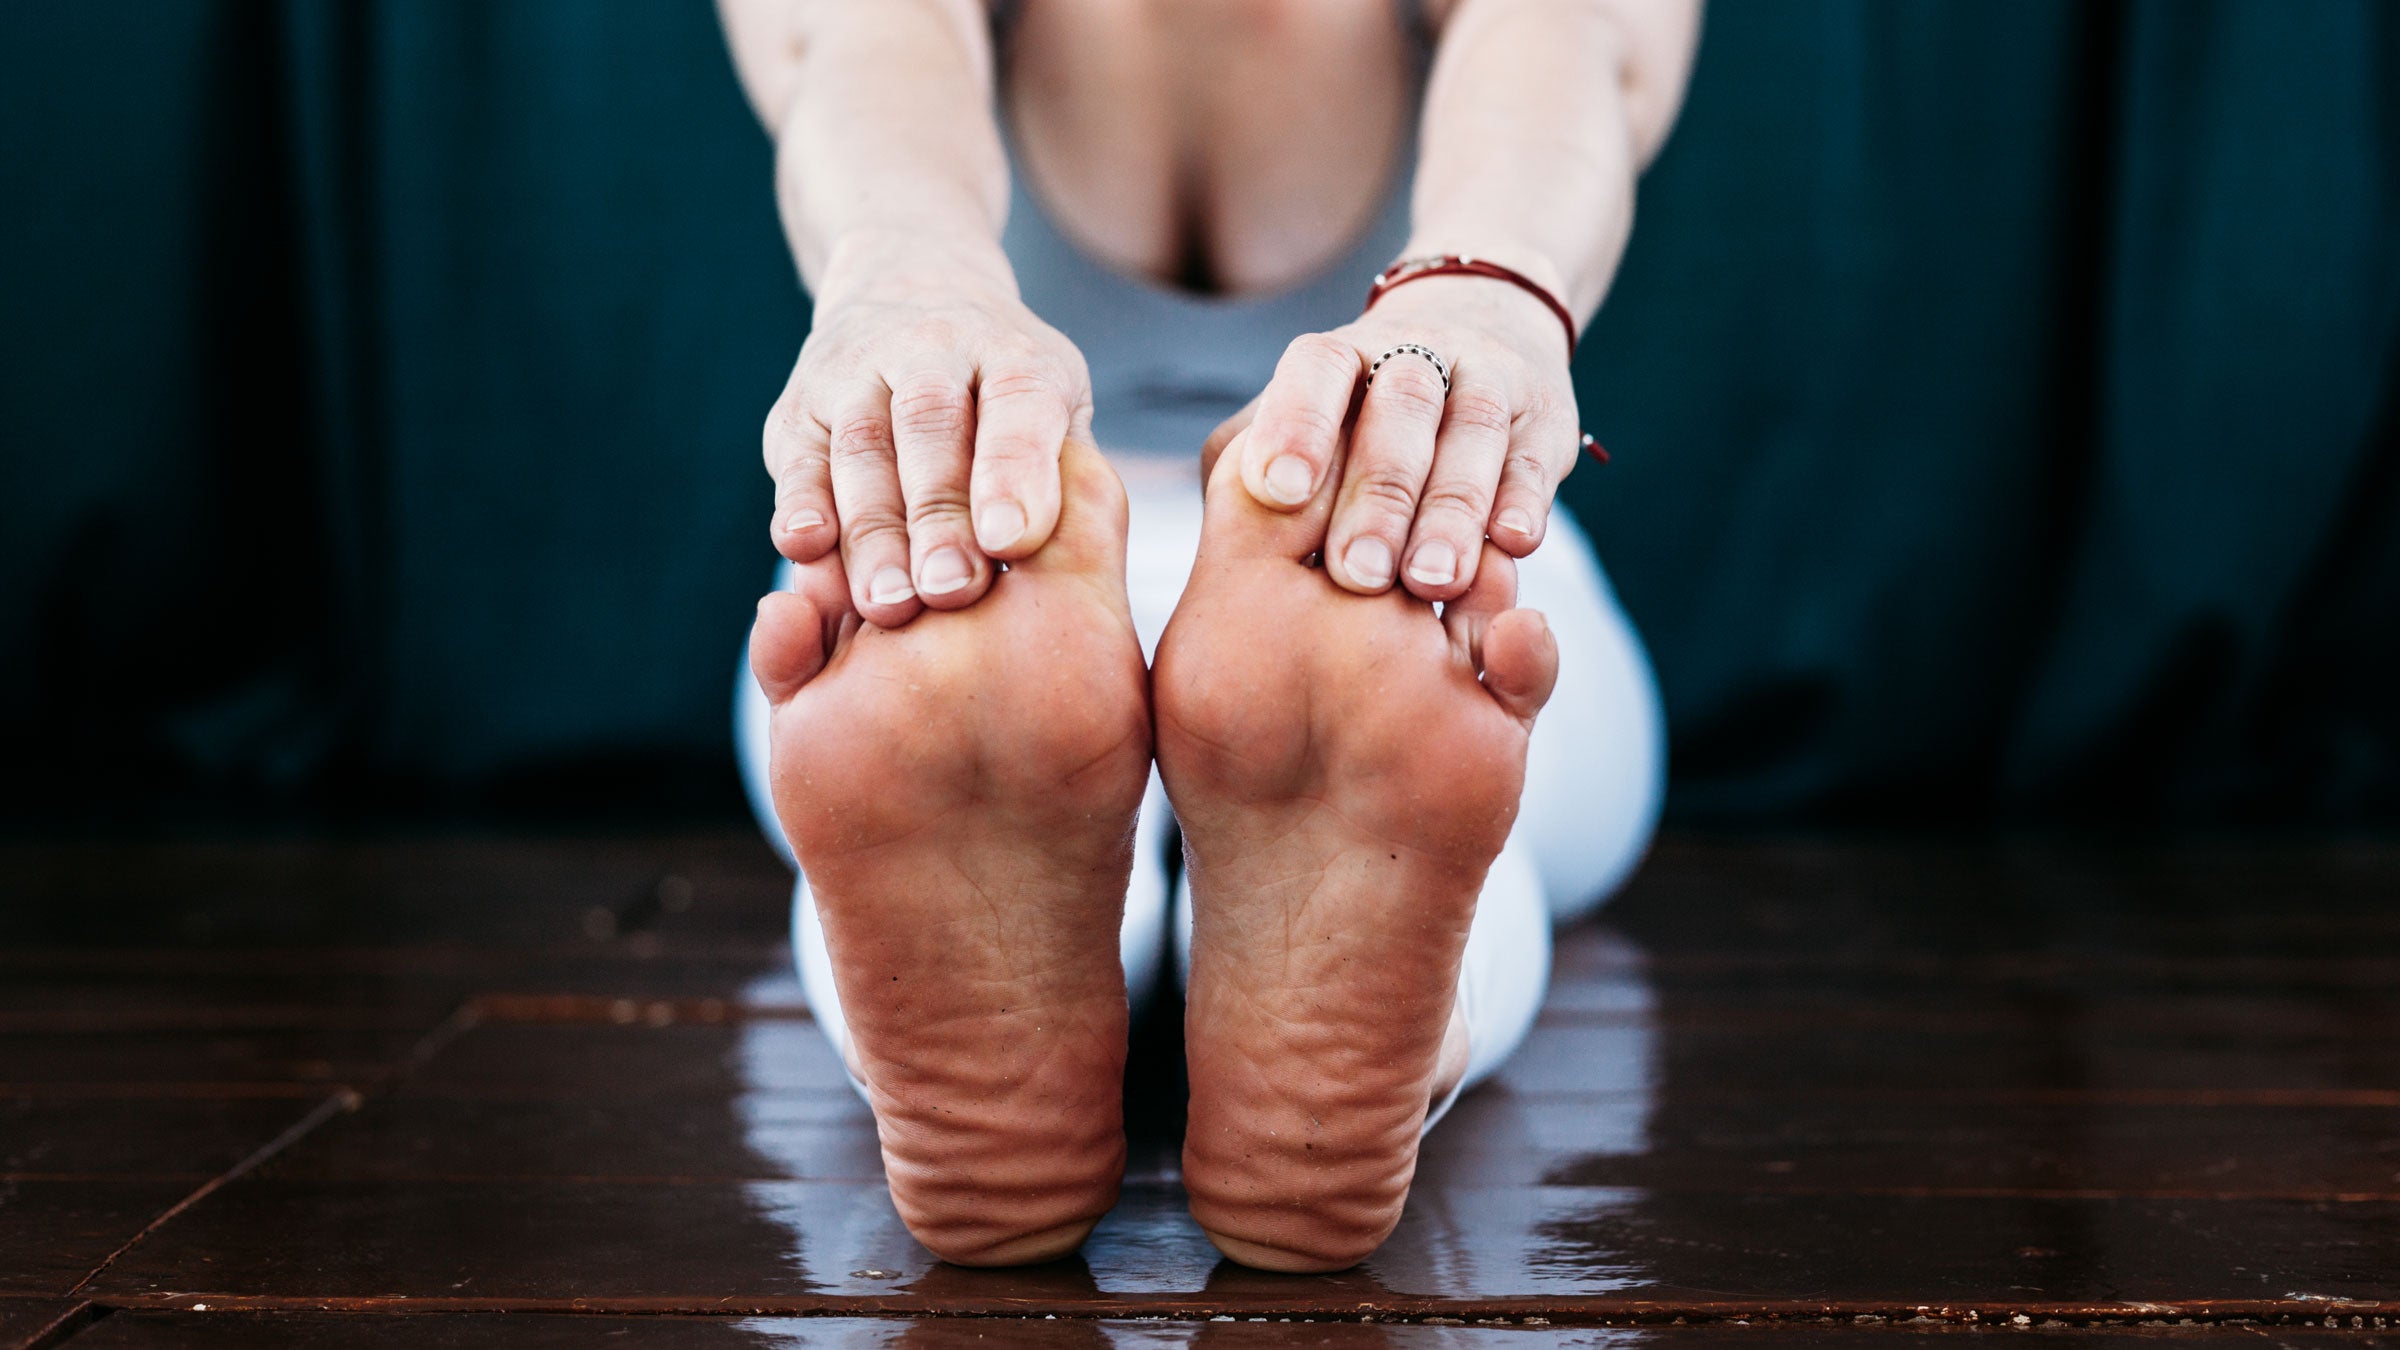 Yoga for Feet and Ankles: 6 Stretches to Build a Supportive Foundation